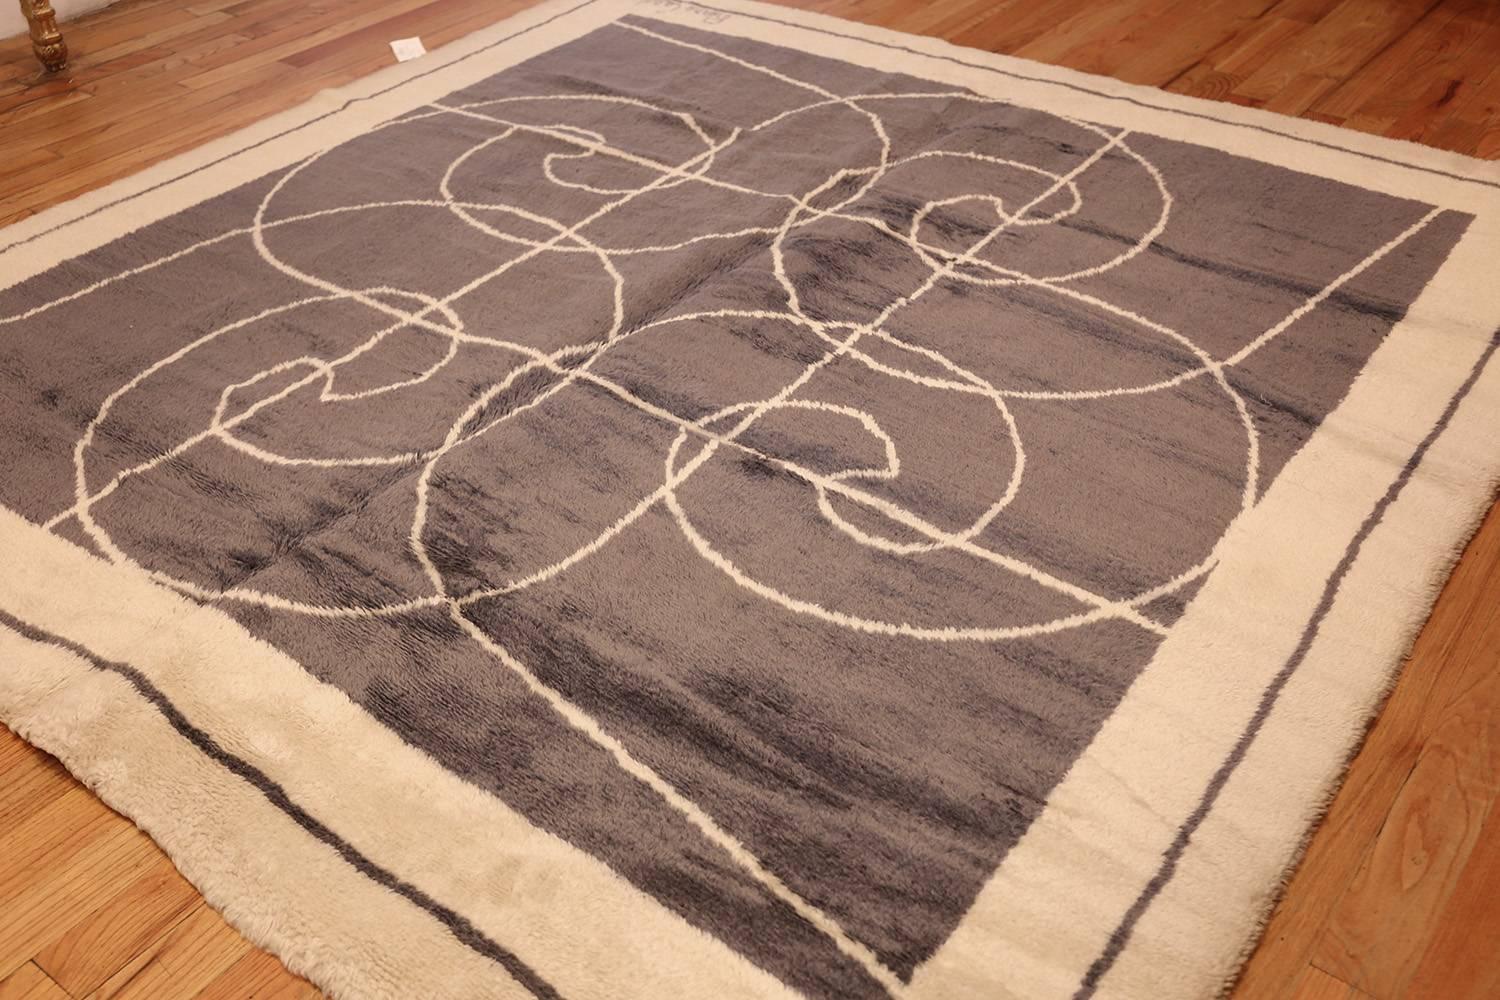 Mid-Century Modern Square Size Mid-Century Rug by Pierre Cardin. Size: 8 ft x 8 ft